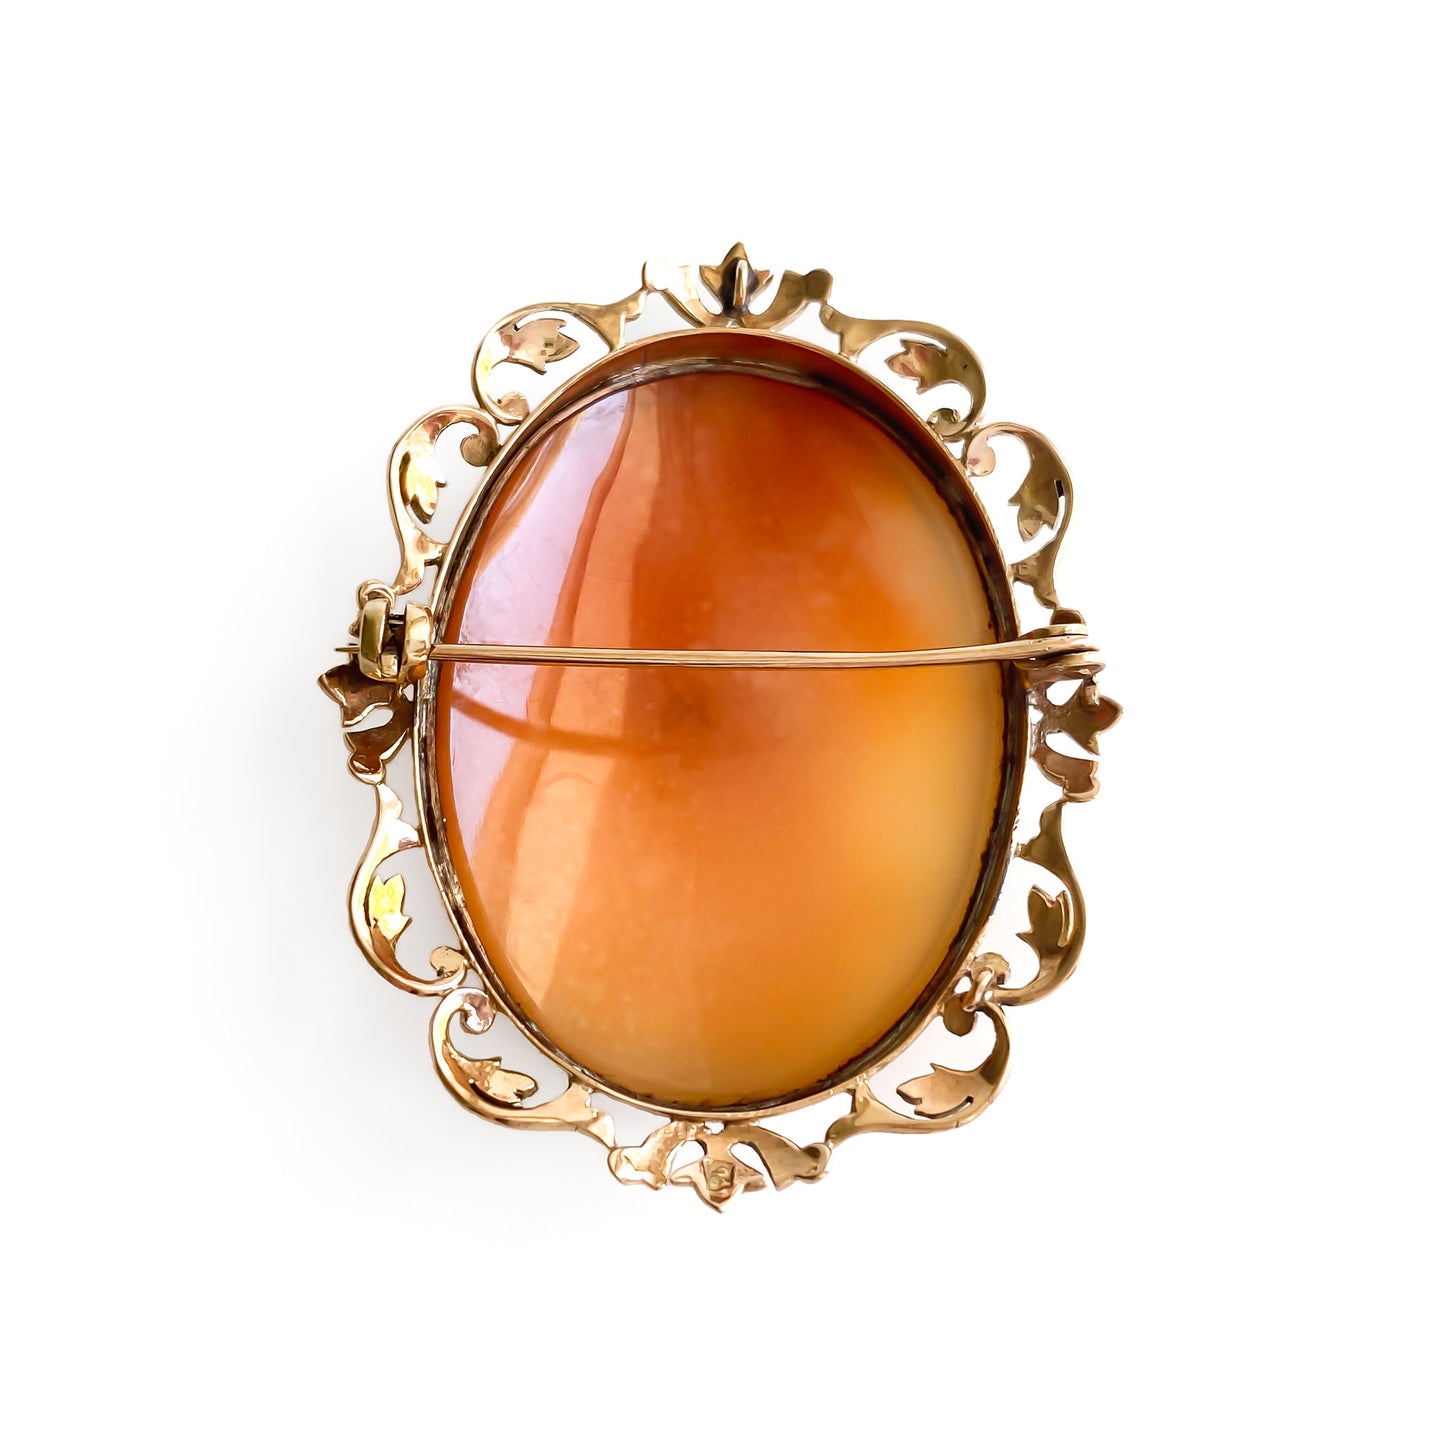 Beautifully carved cameo set in an ornate 9ct rose gold frame. Circa 1940’s